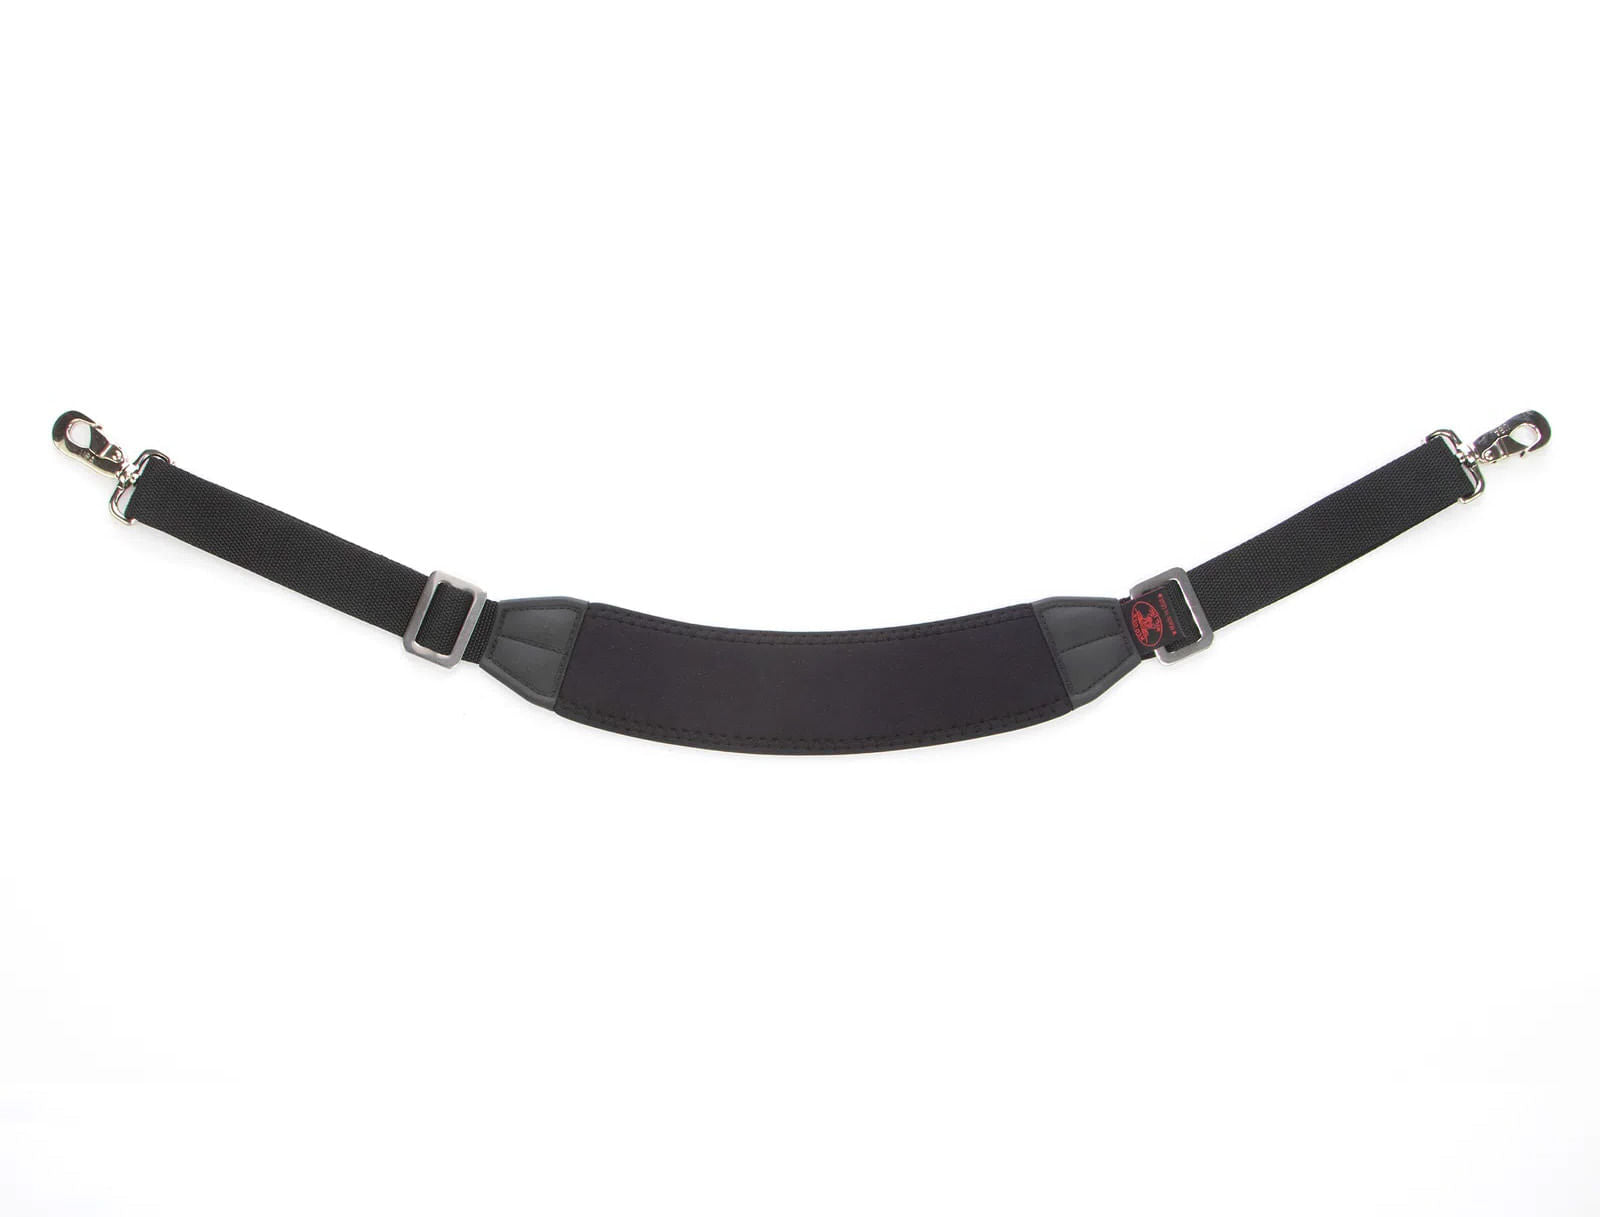 expanded view of the shoulder strap curve. 